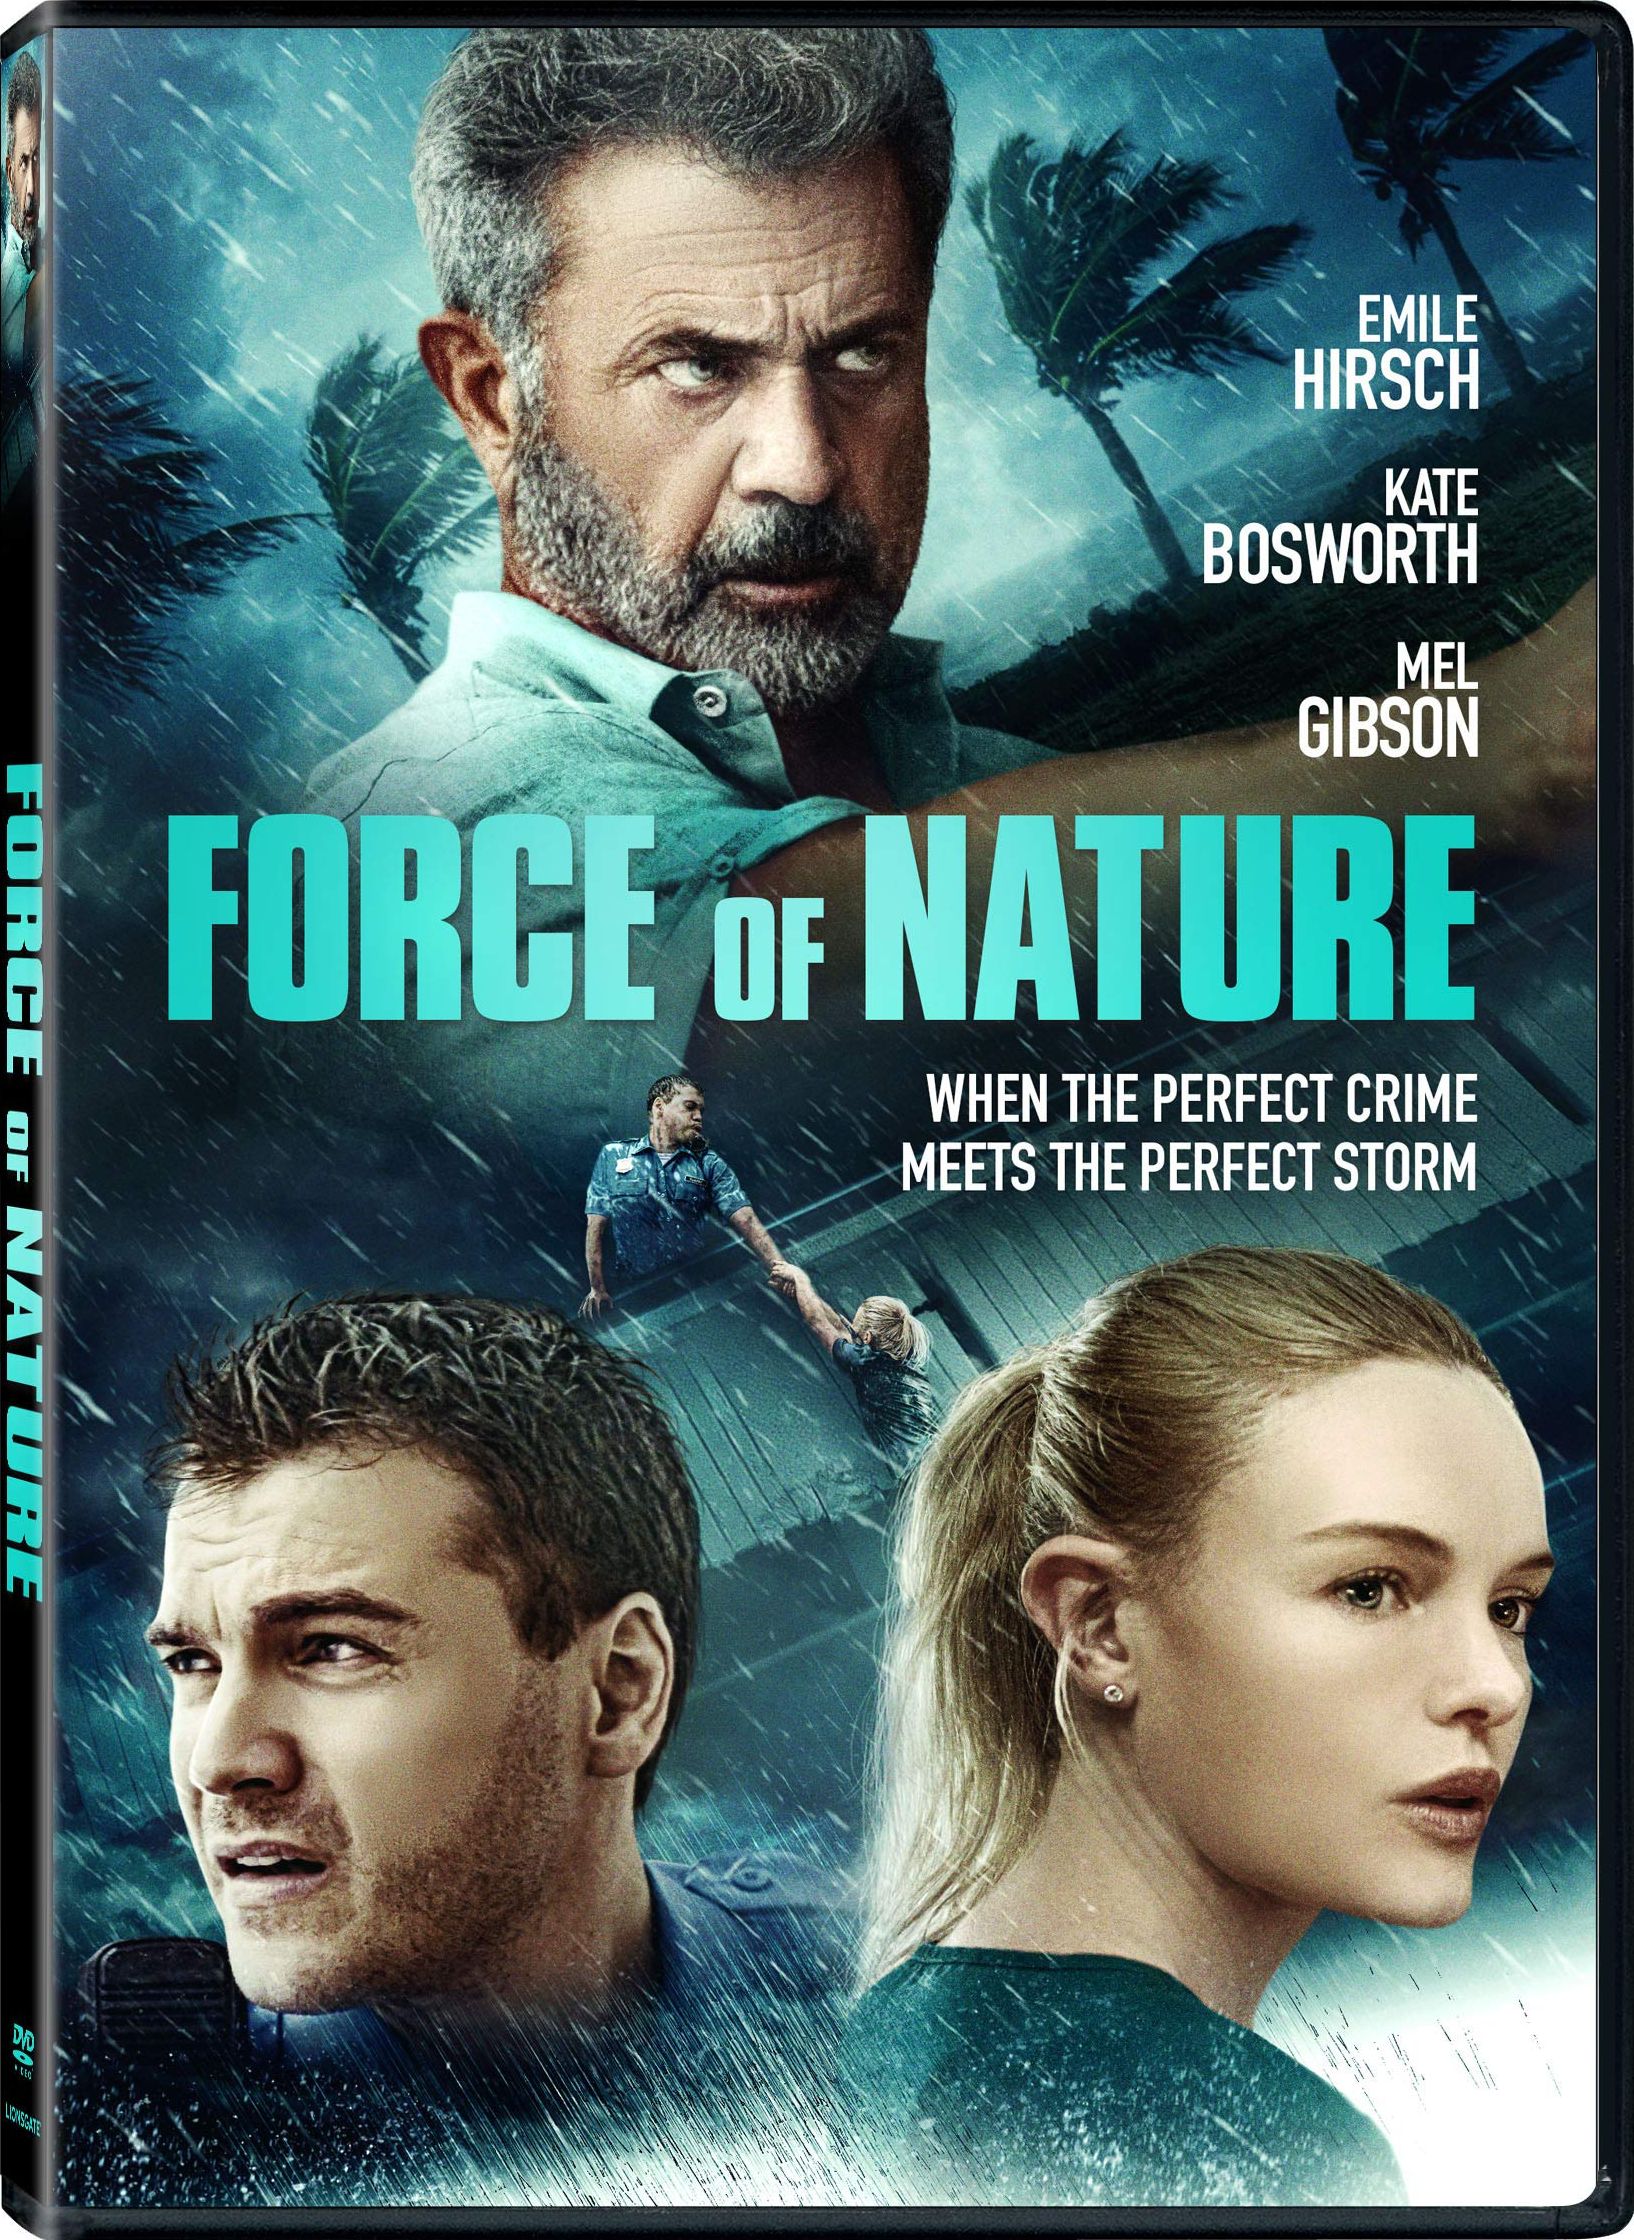 Force of Nature DVD Release Date June 30, 2020